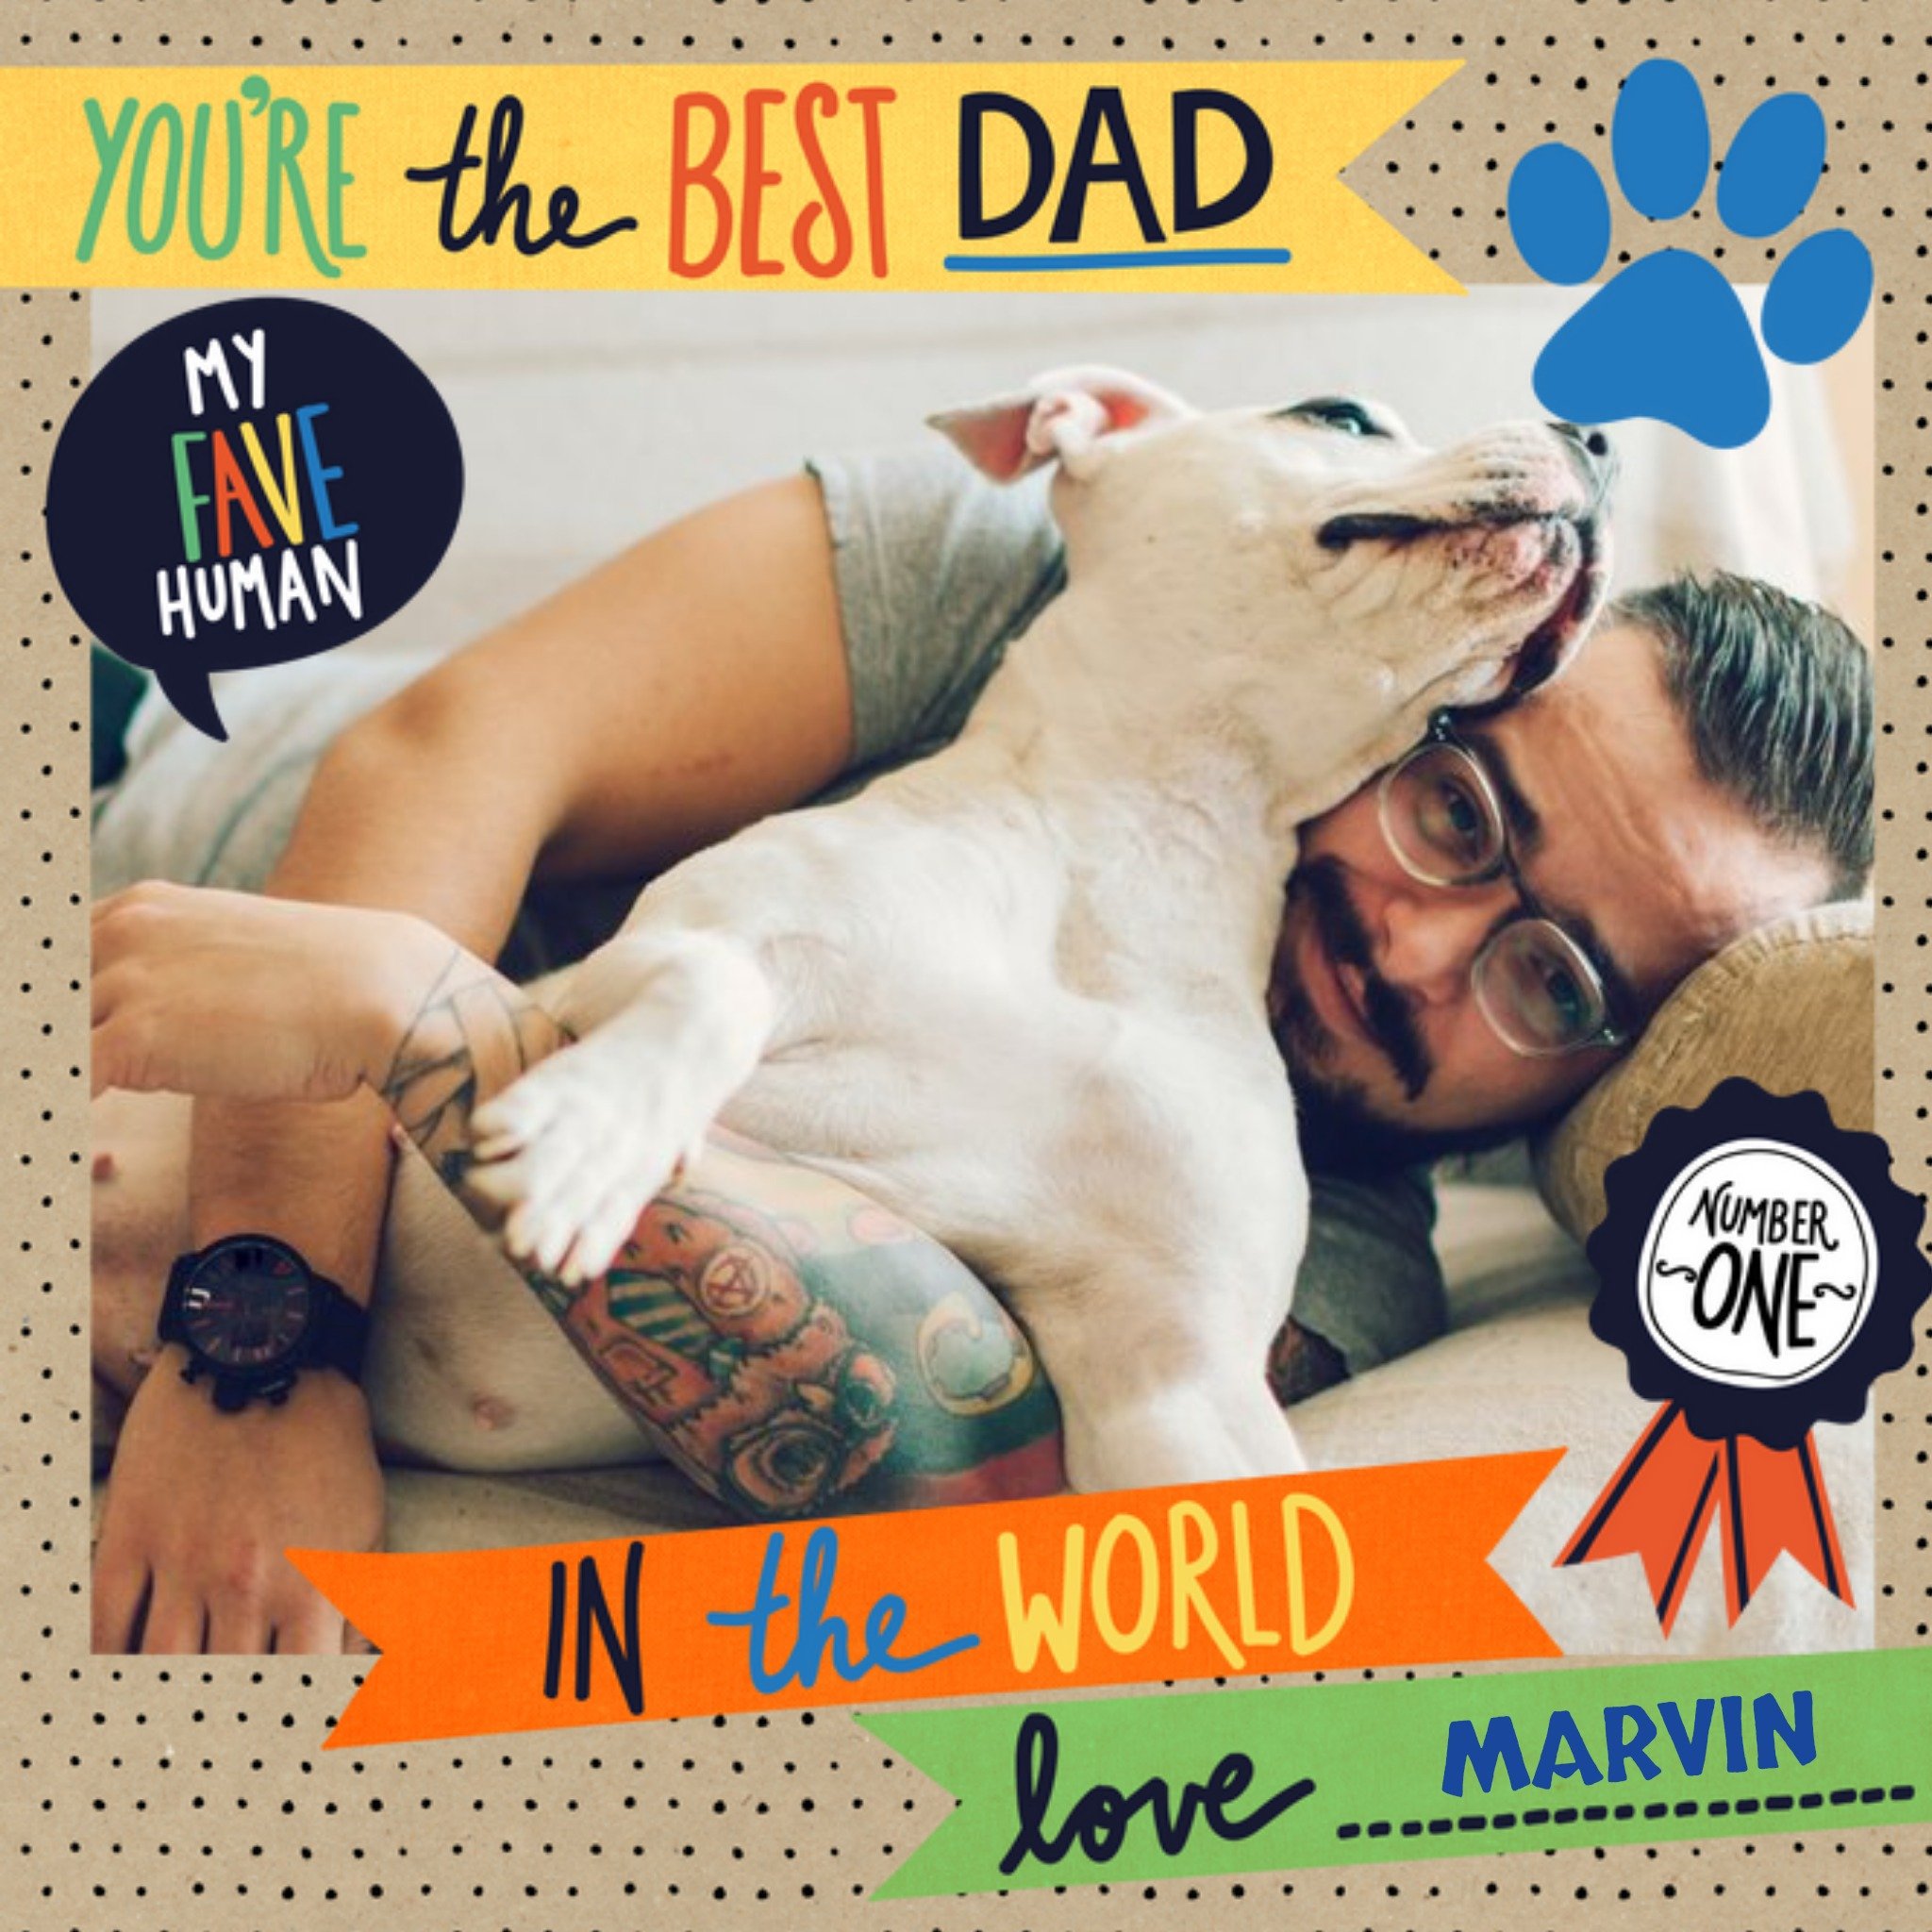 Moonpig From The Pet Youre The Best Dad Photo Card, Large